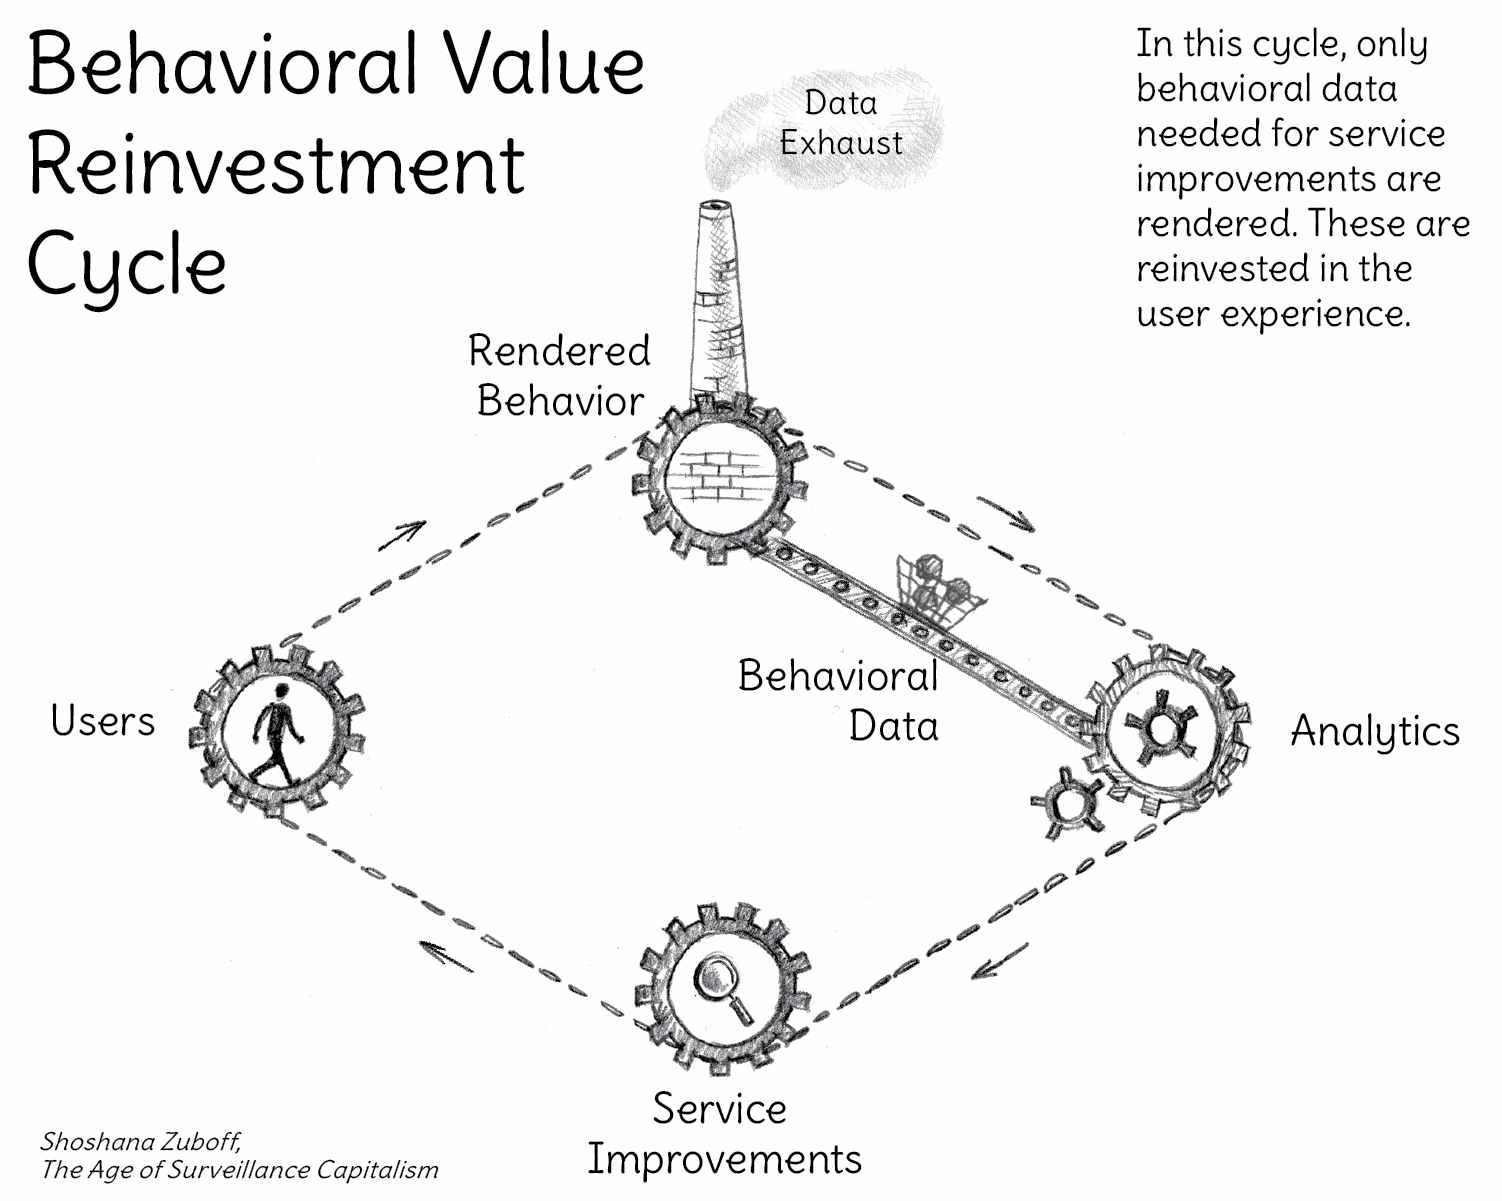 figure_1._the_behavioral_value_reinvestment_cycle.jpg